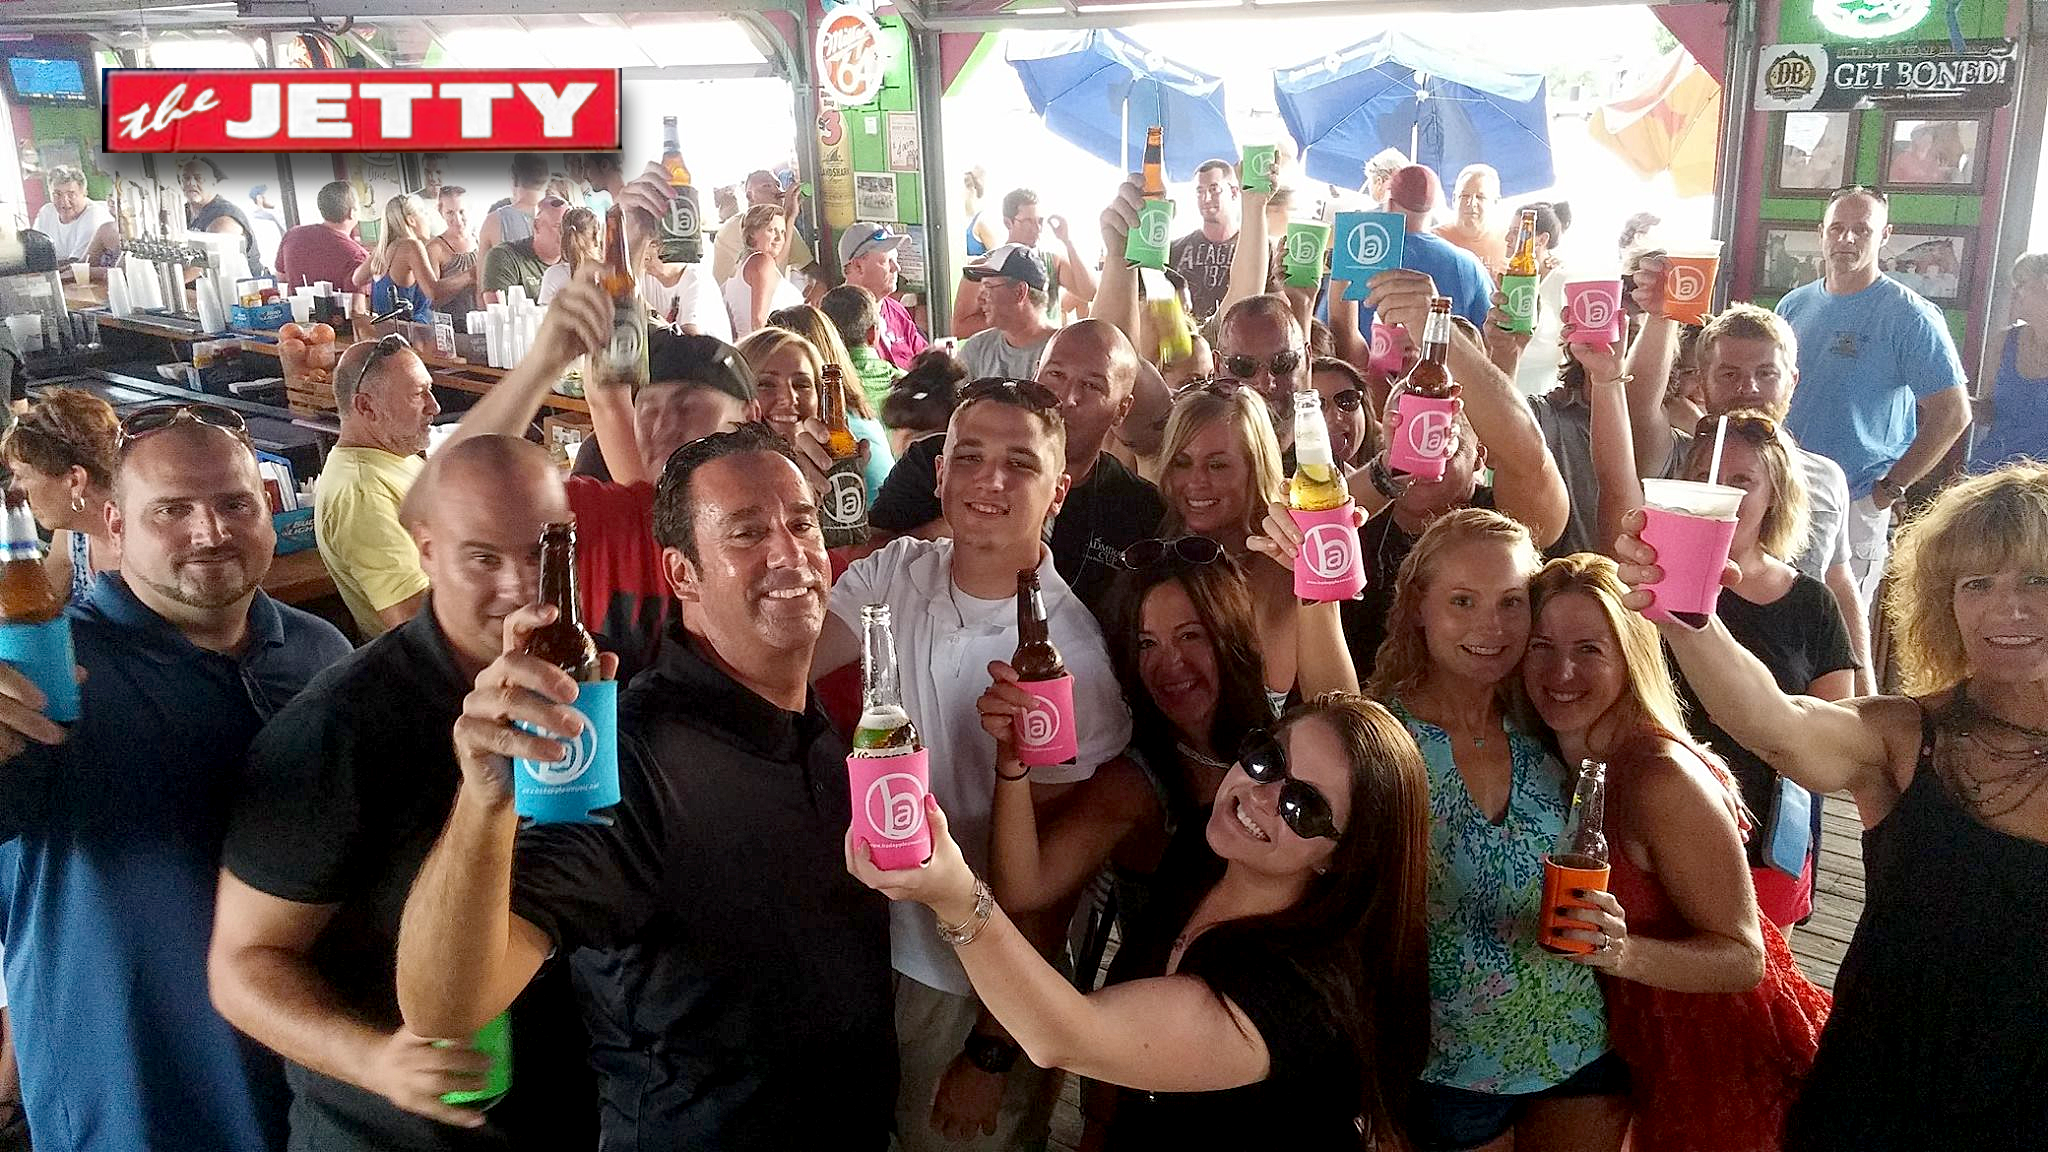 Bad Apples friends and fans showing support with koozies at The Jetty